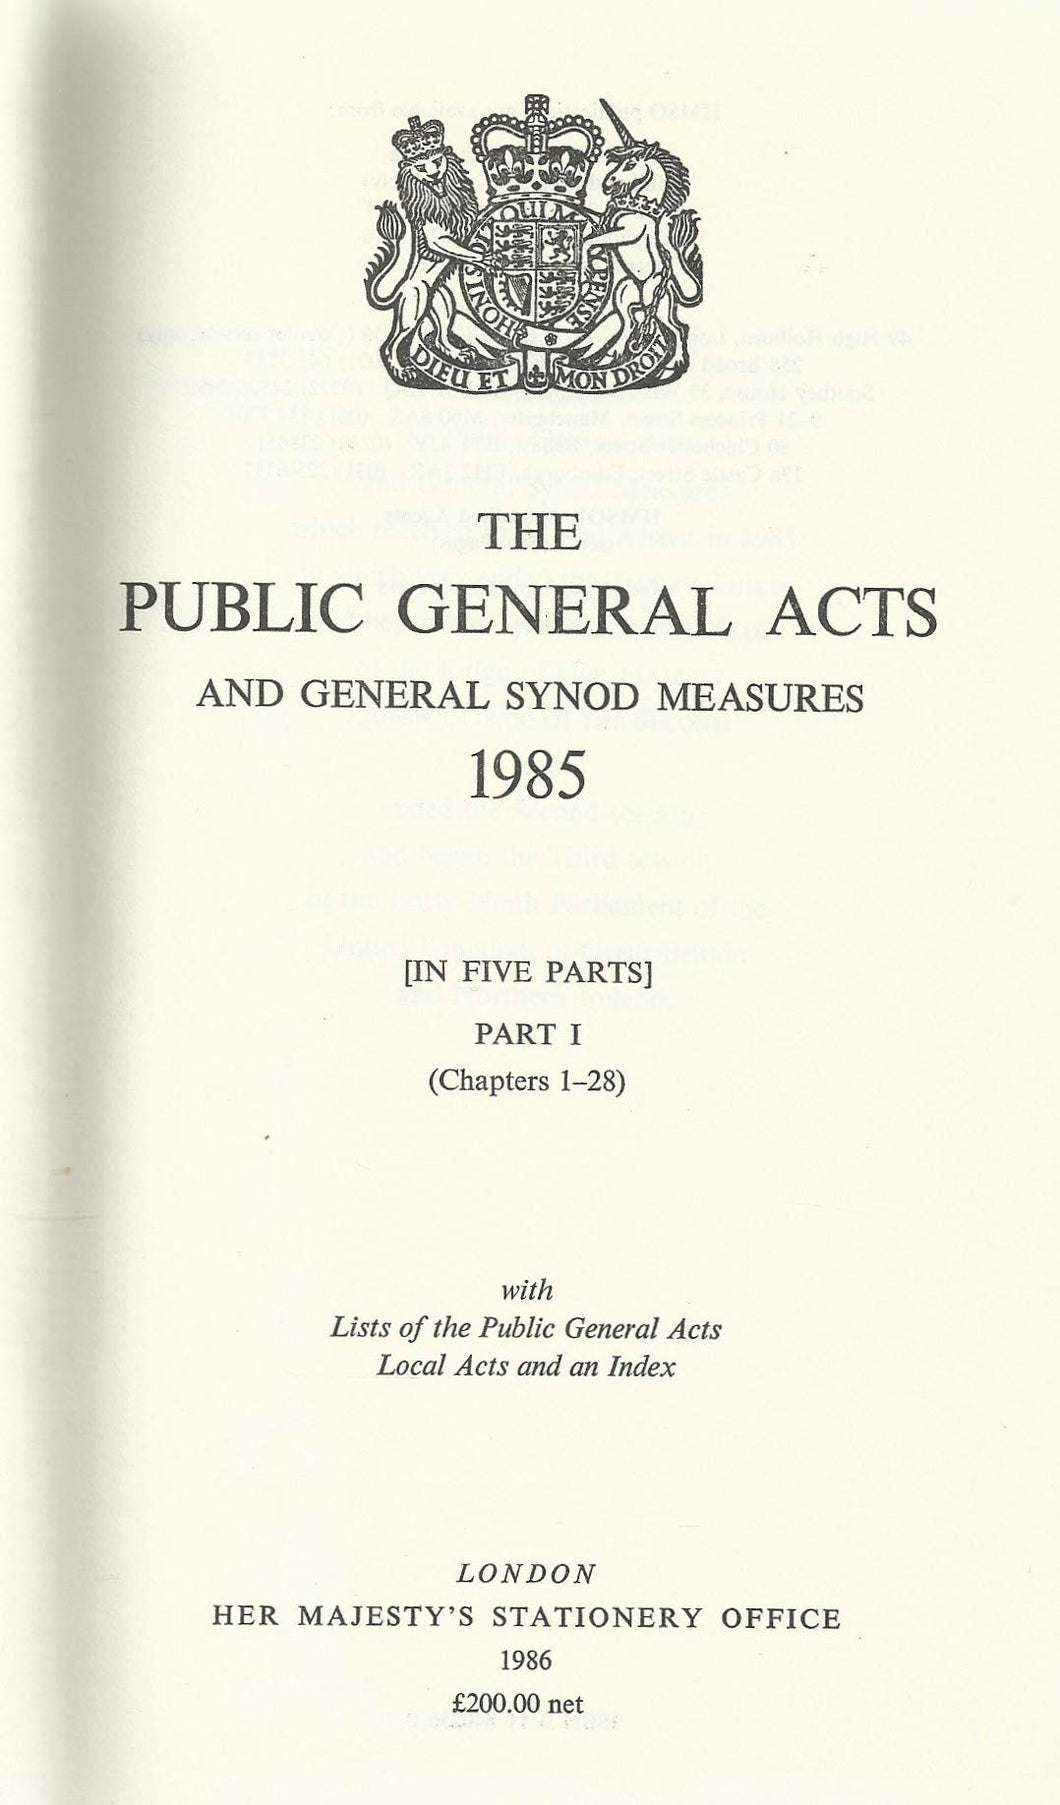 The Public General Acts and General Synod Measures 1985